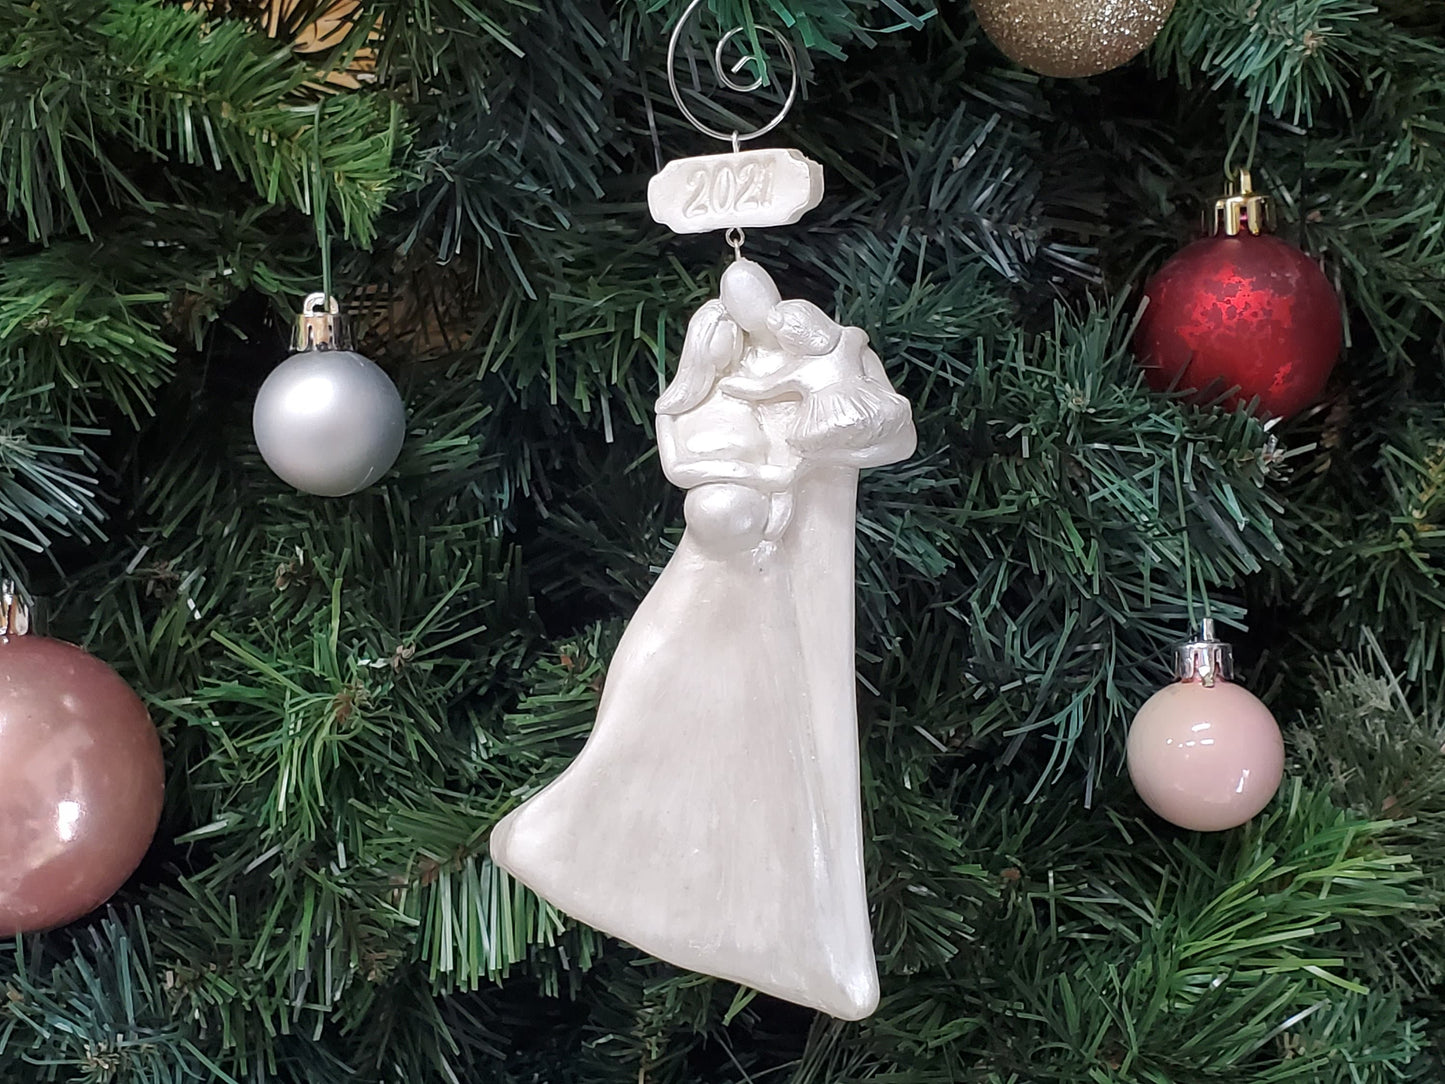 Pregnant Expecting Family of Three with a Toddler GirlChristmas Ornament OrDrEFO3-YTC-G